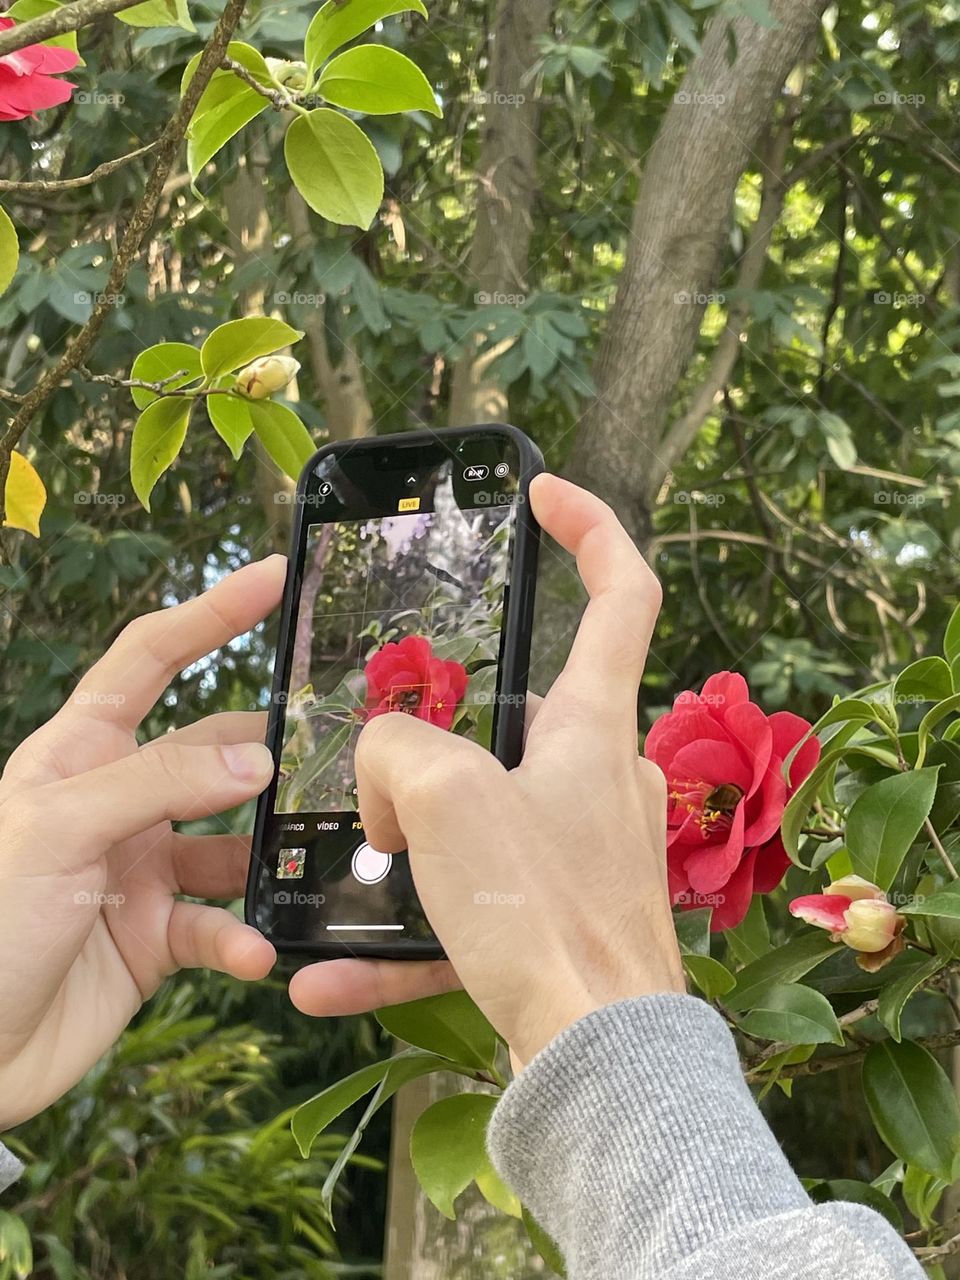 Taking a picture of a flower 